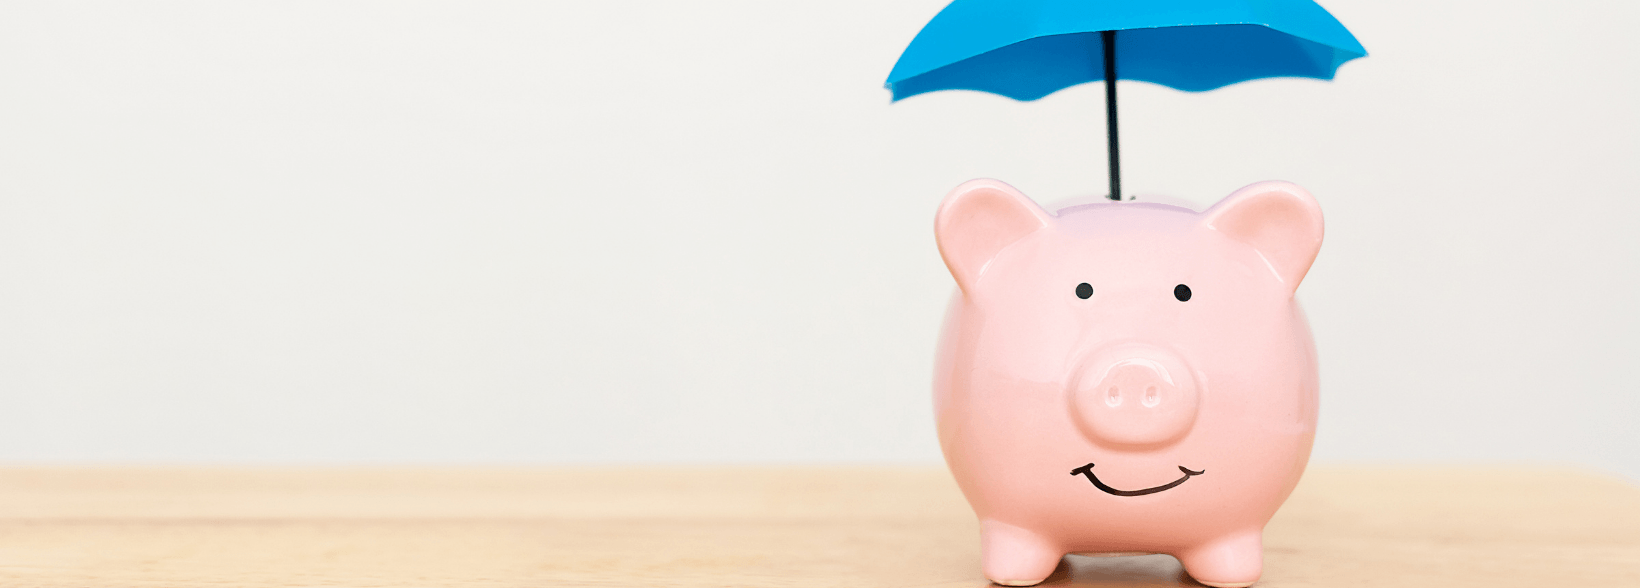 Piggy bank with umbrella over it to represent 'Income Protection'